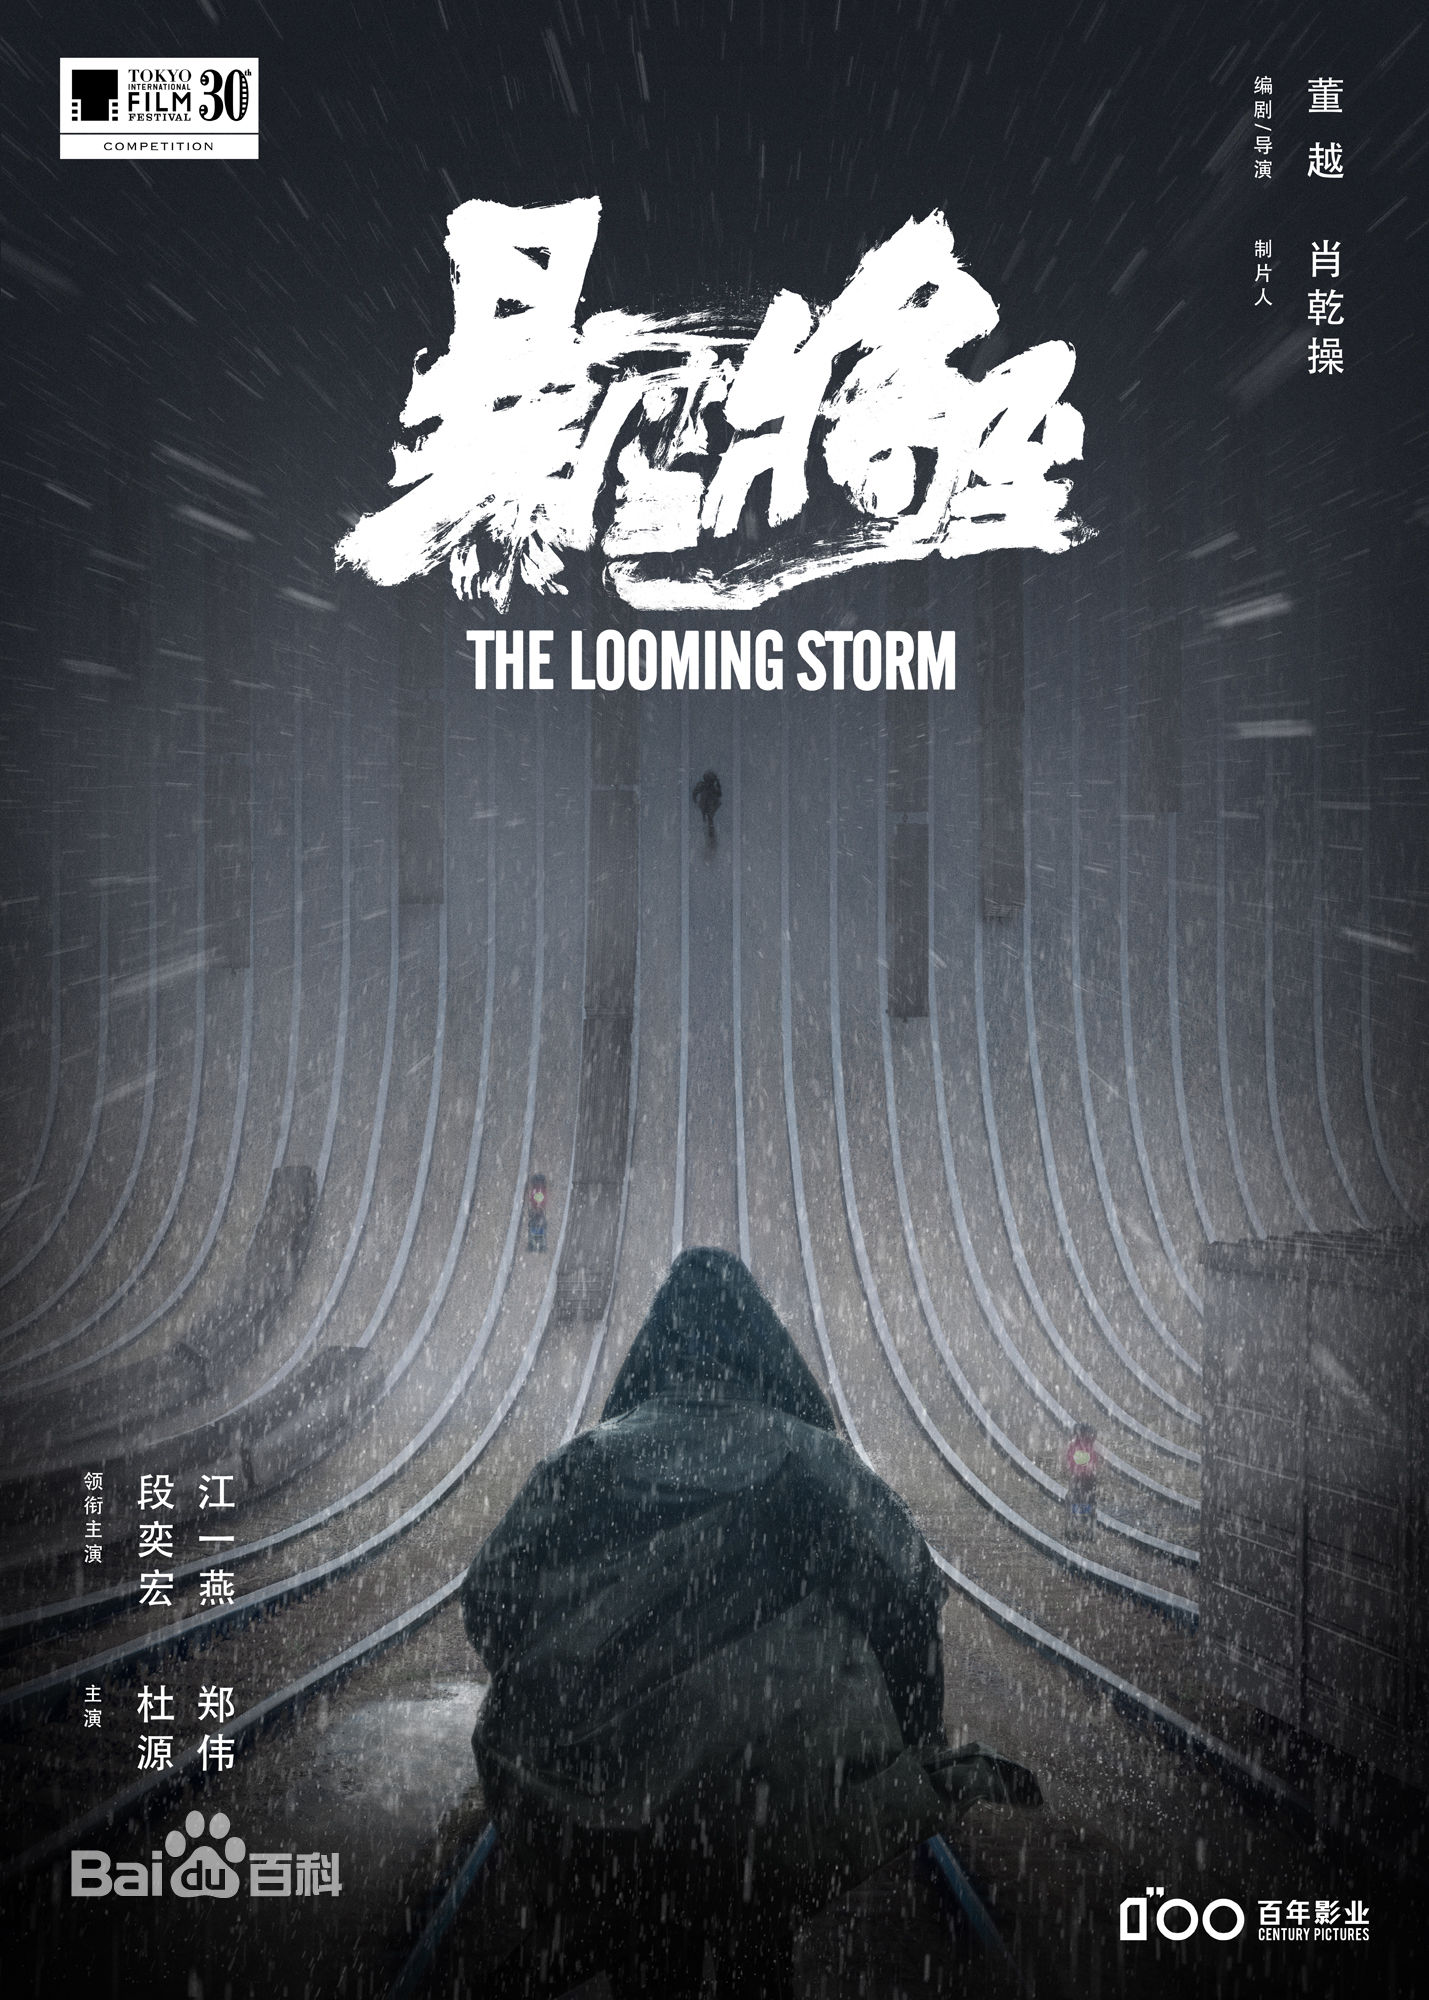 The Looming Storm poster